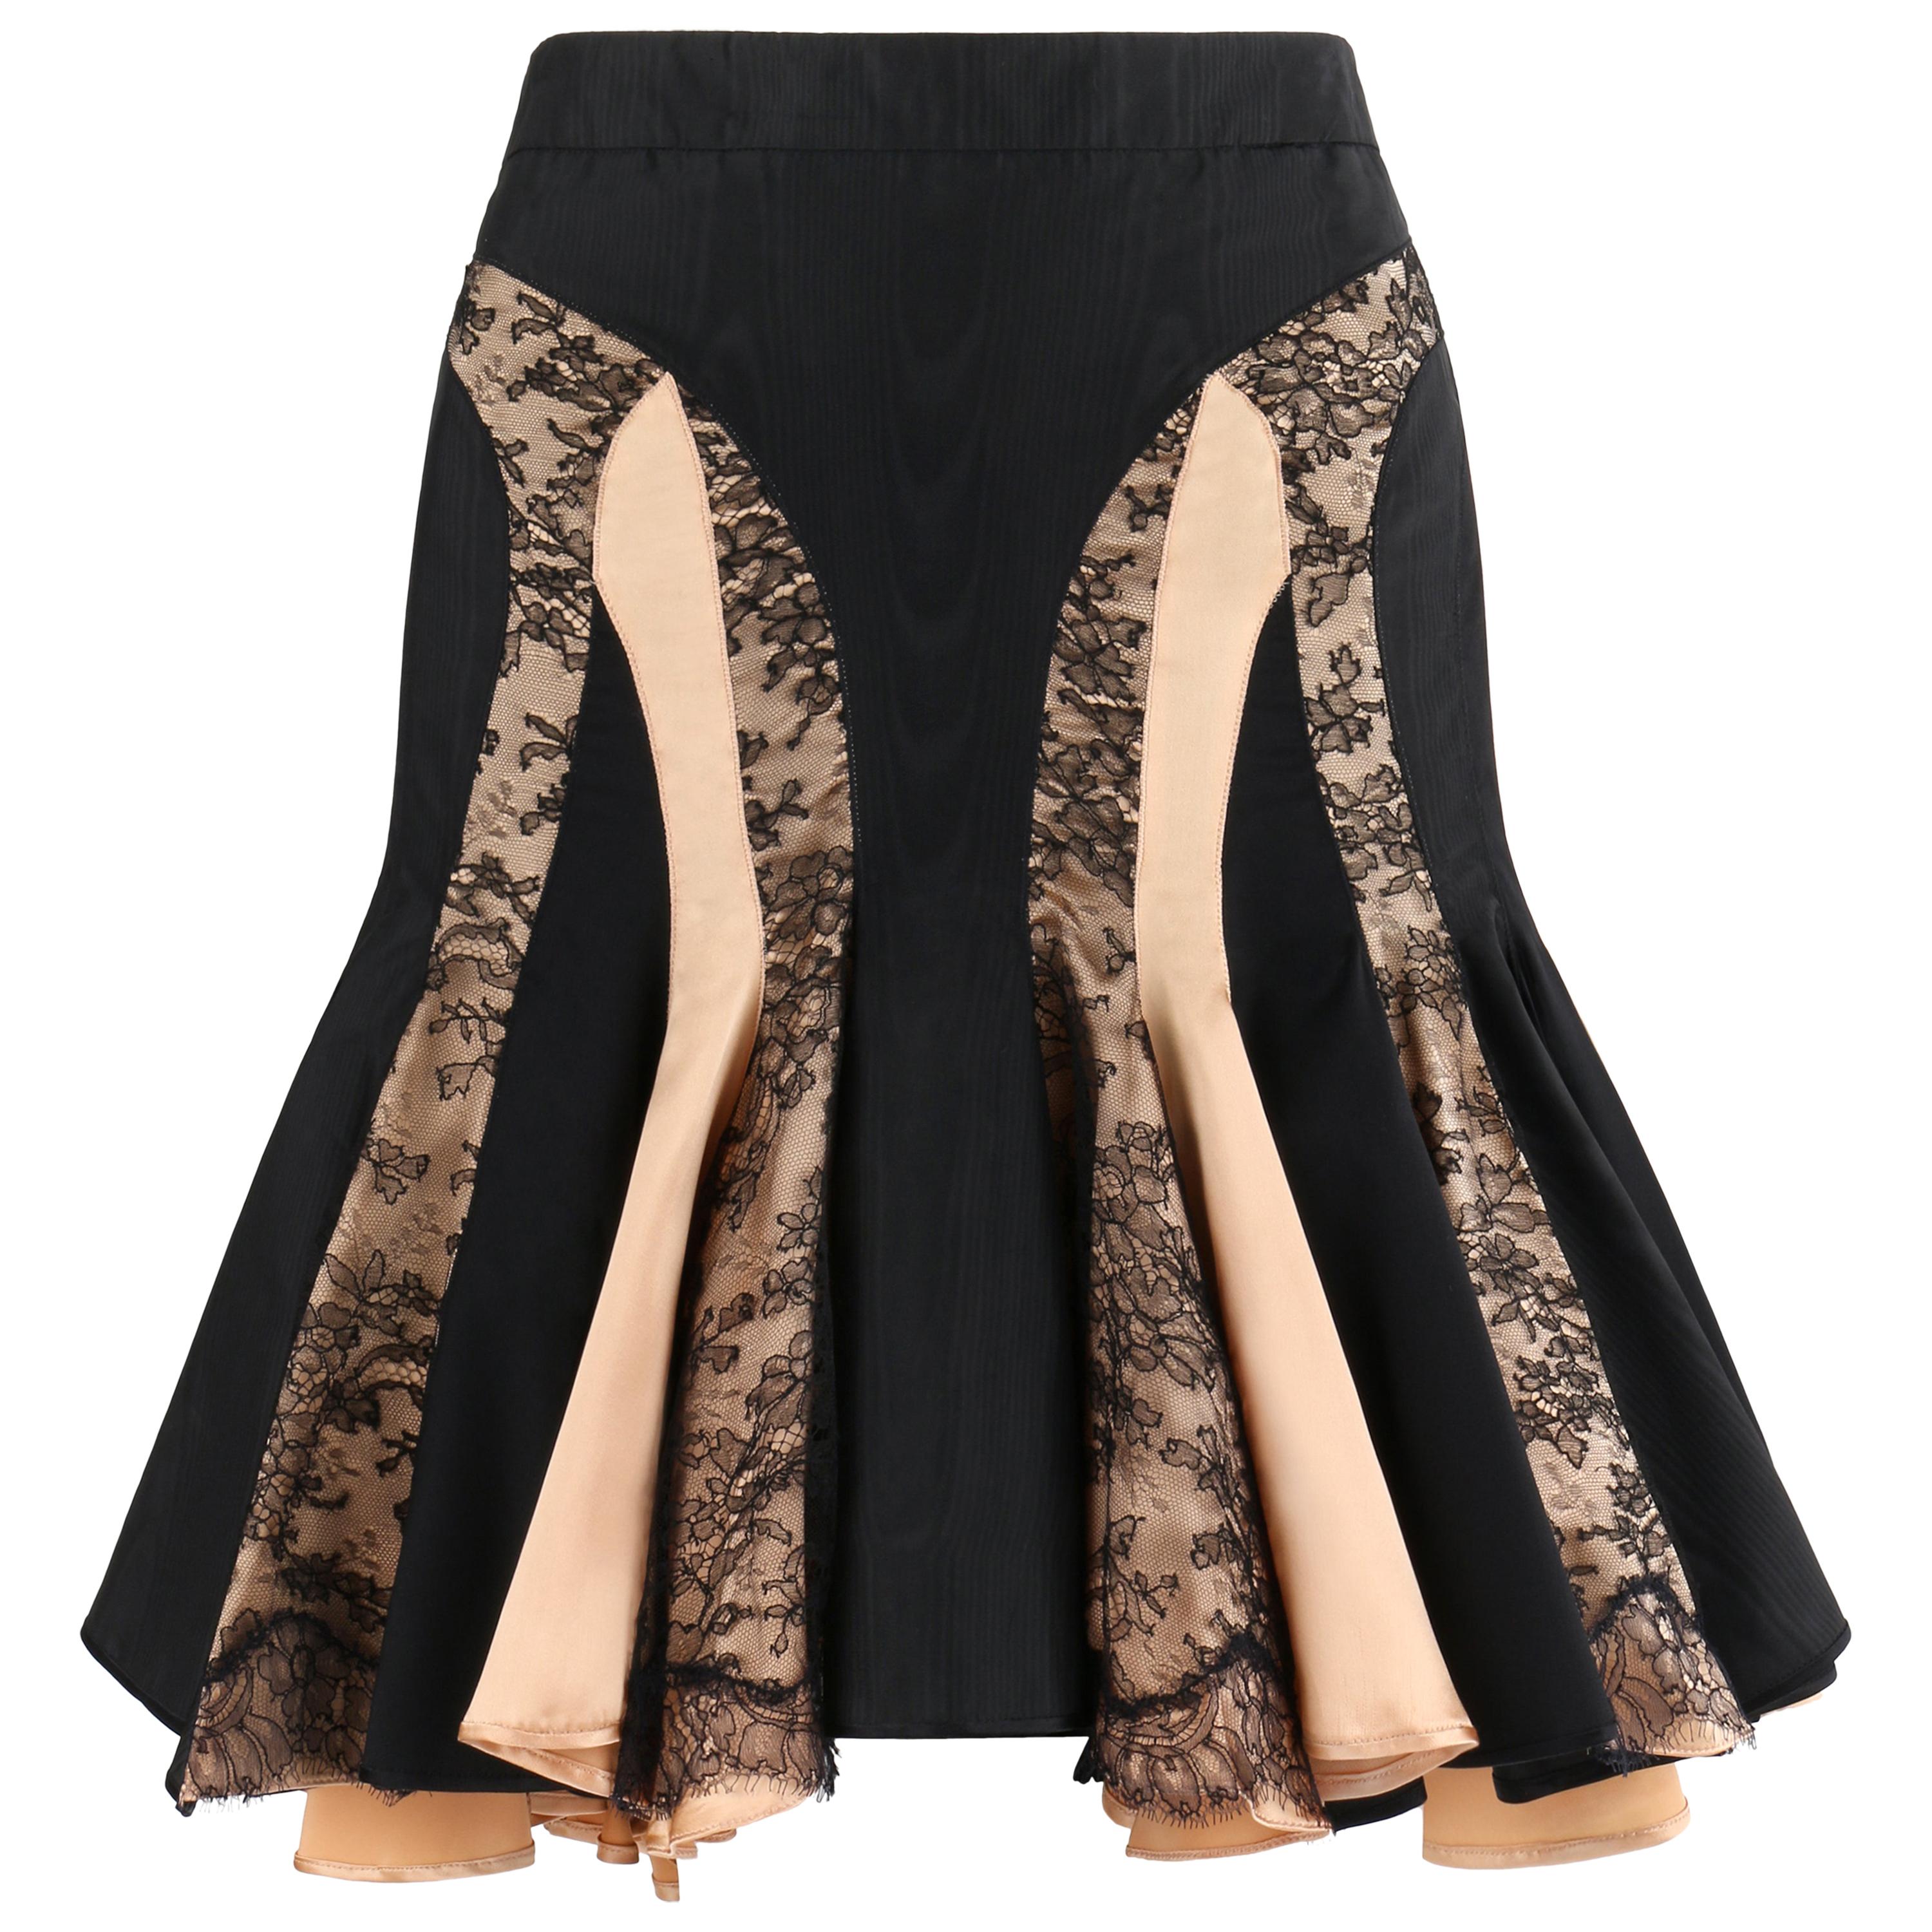 ALEXANDER McQUEEN S/S 2004 Black Champagne Lace Flared High Low Trumpet Skirt